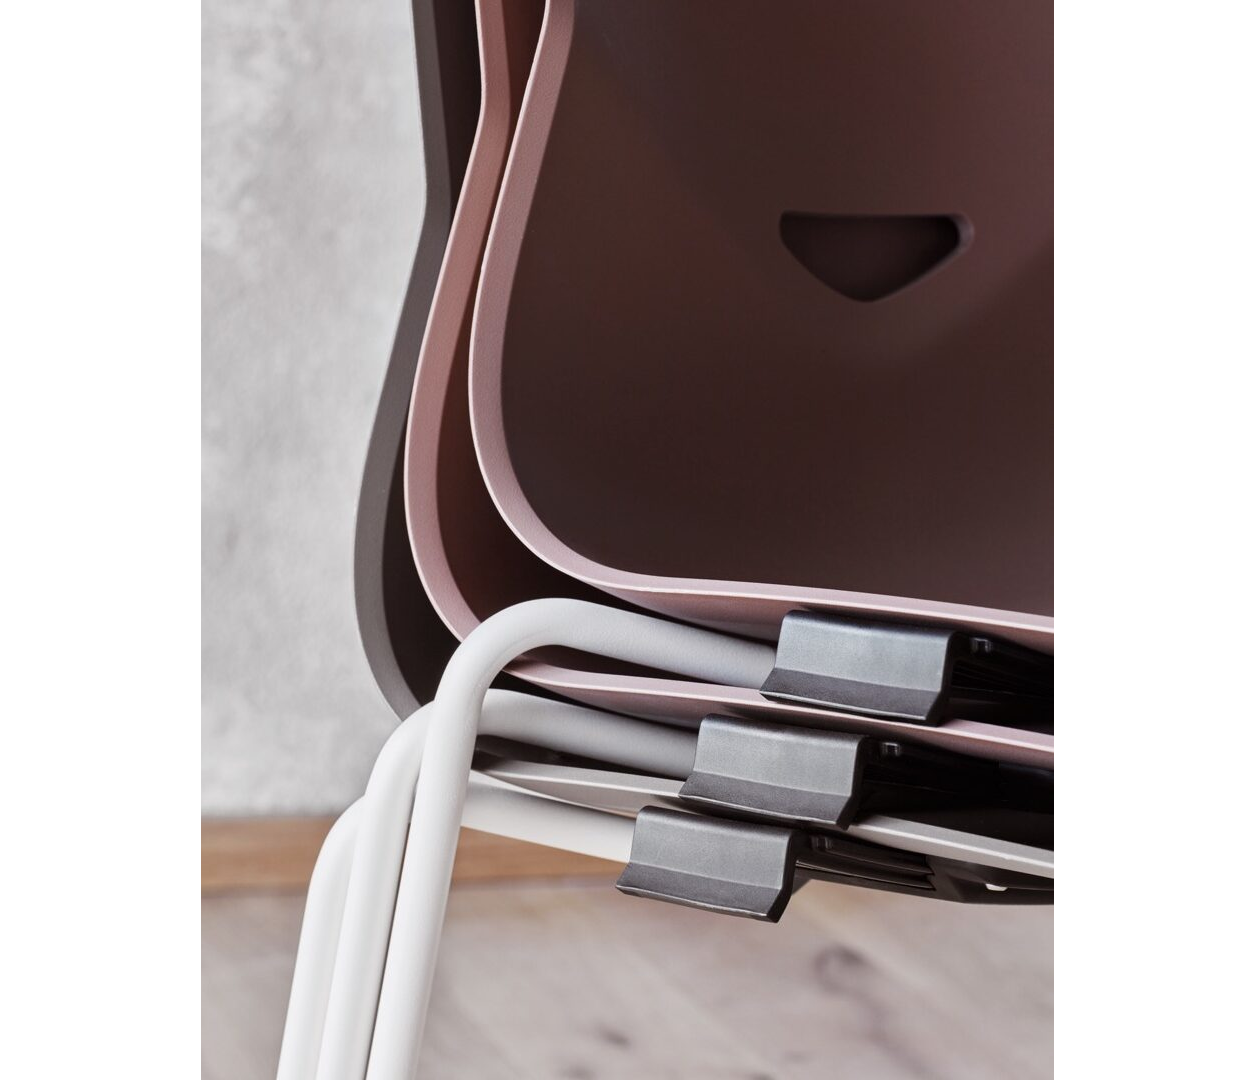 OCEE&FOUR – Chairs – FourSure 44 – Details Image 17 Large